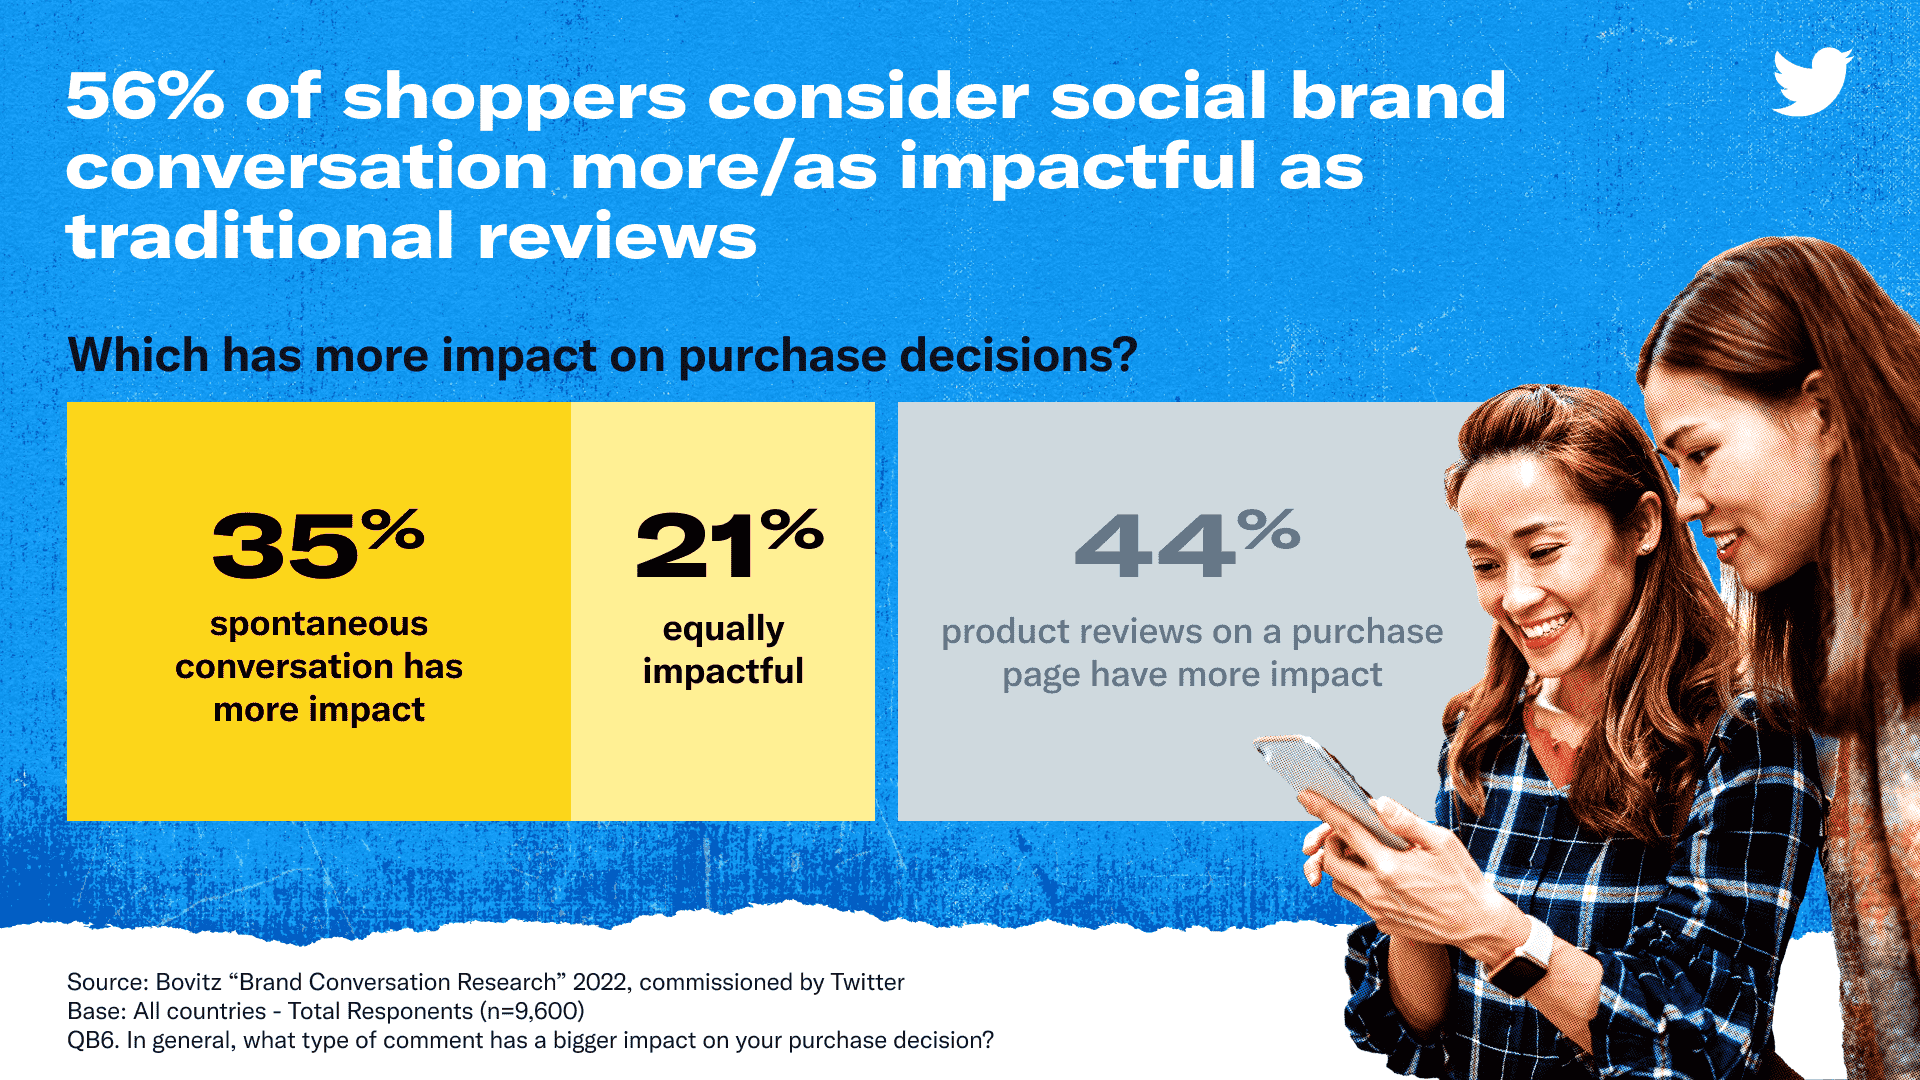 56% of shoppers consider social brand conversation more or as important as traditional reviews